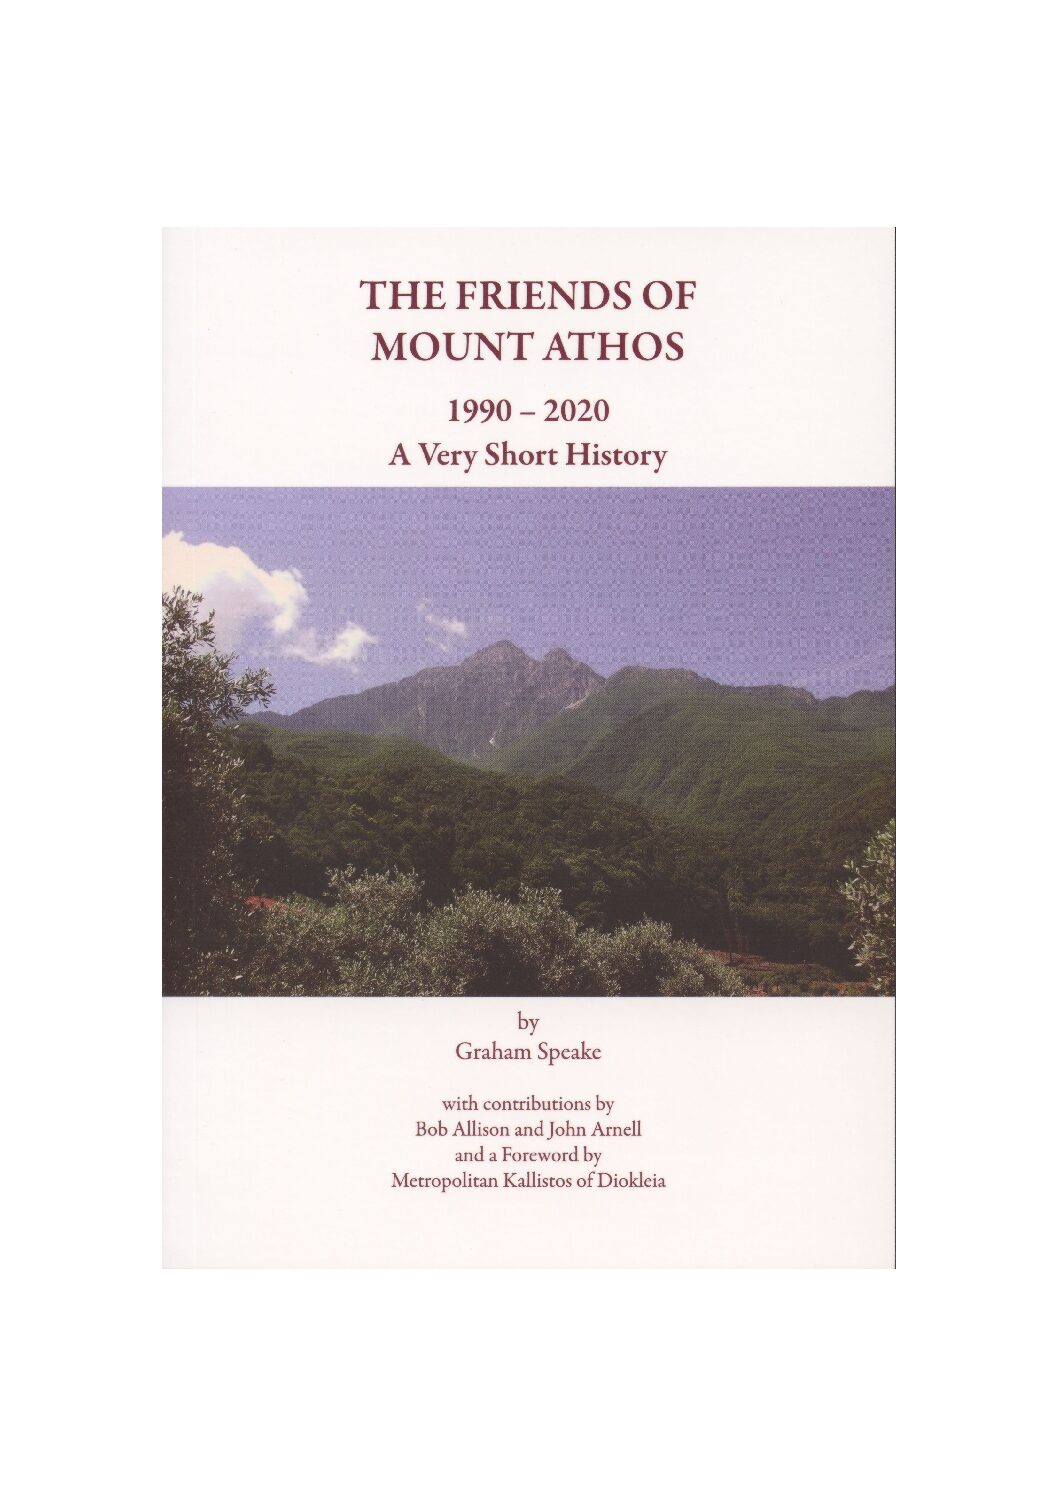 The Friends of Mount Athos 1990 - 2020: A Very Short History